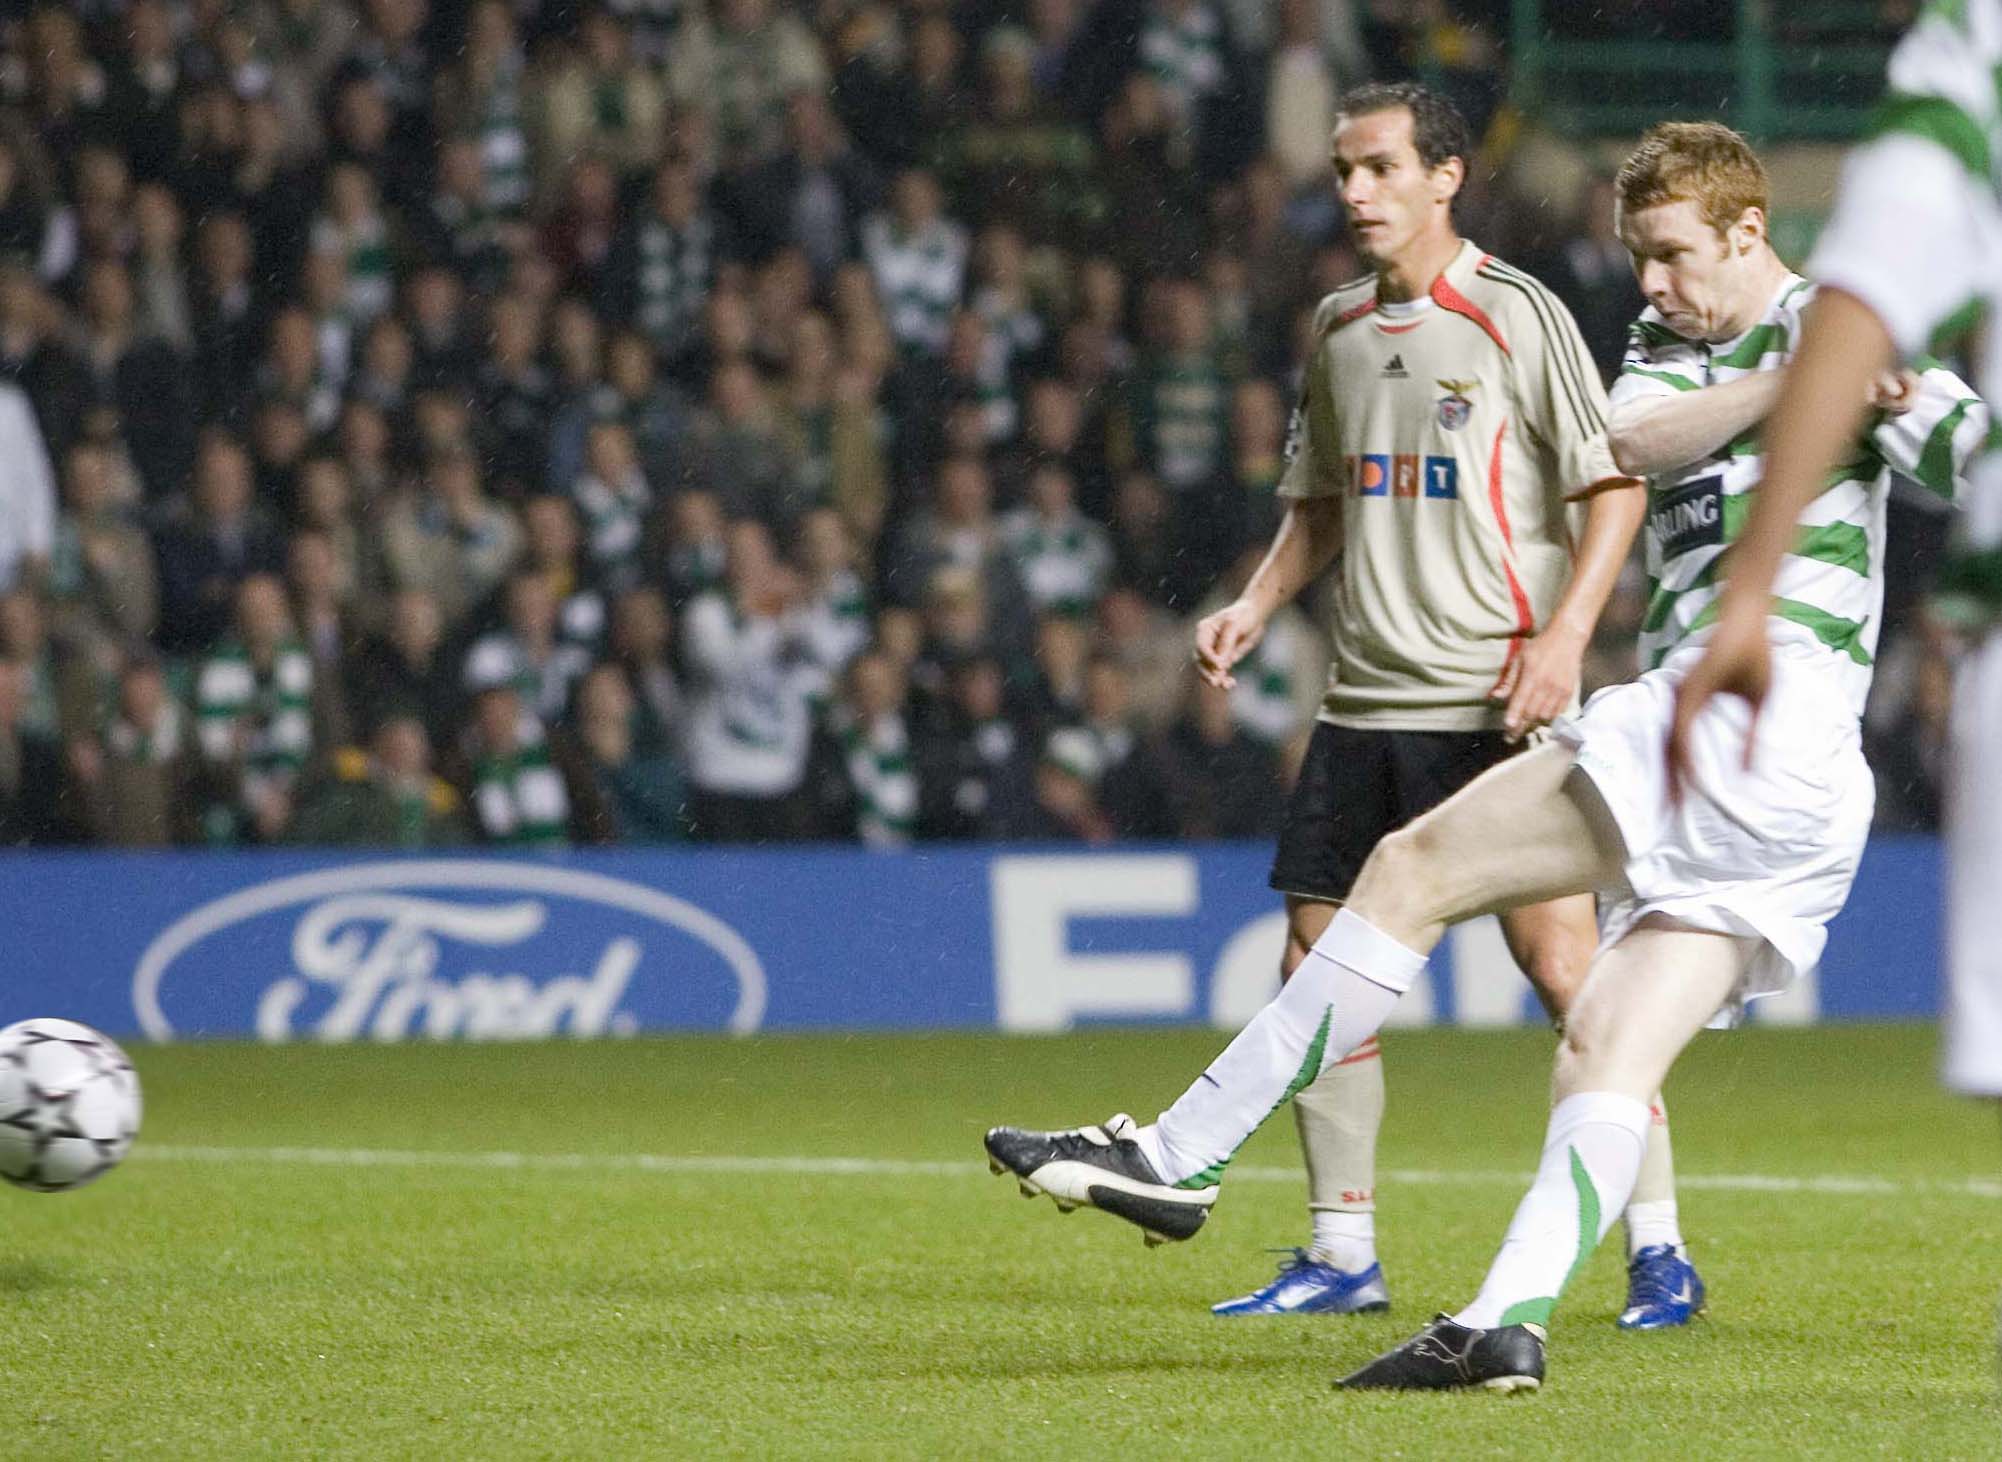 17/10/06 Champions League .Celtic V Benfica (3-0) .Celtic Park - Glasgow .Stephen Pearson (Right) Blasts Home Celtic'S Third Of The Evening To Put The Result Beyond Doubt